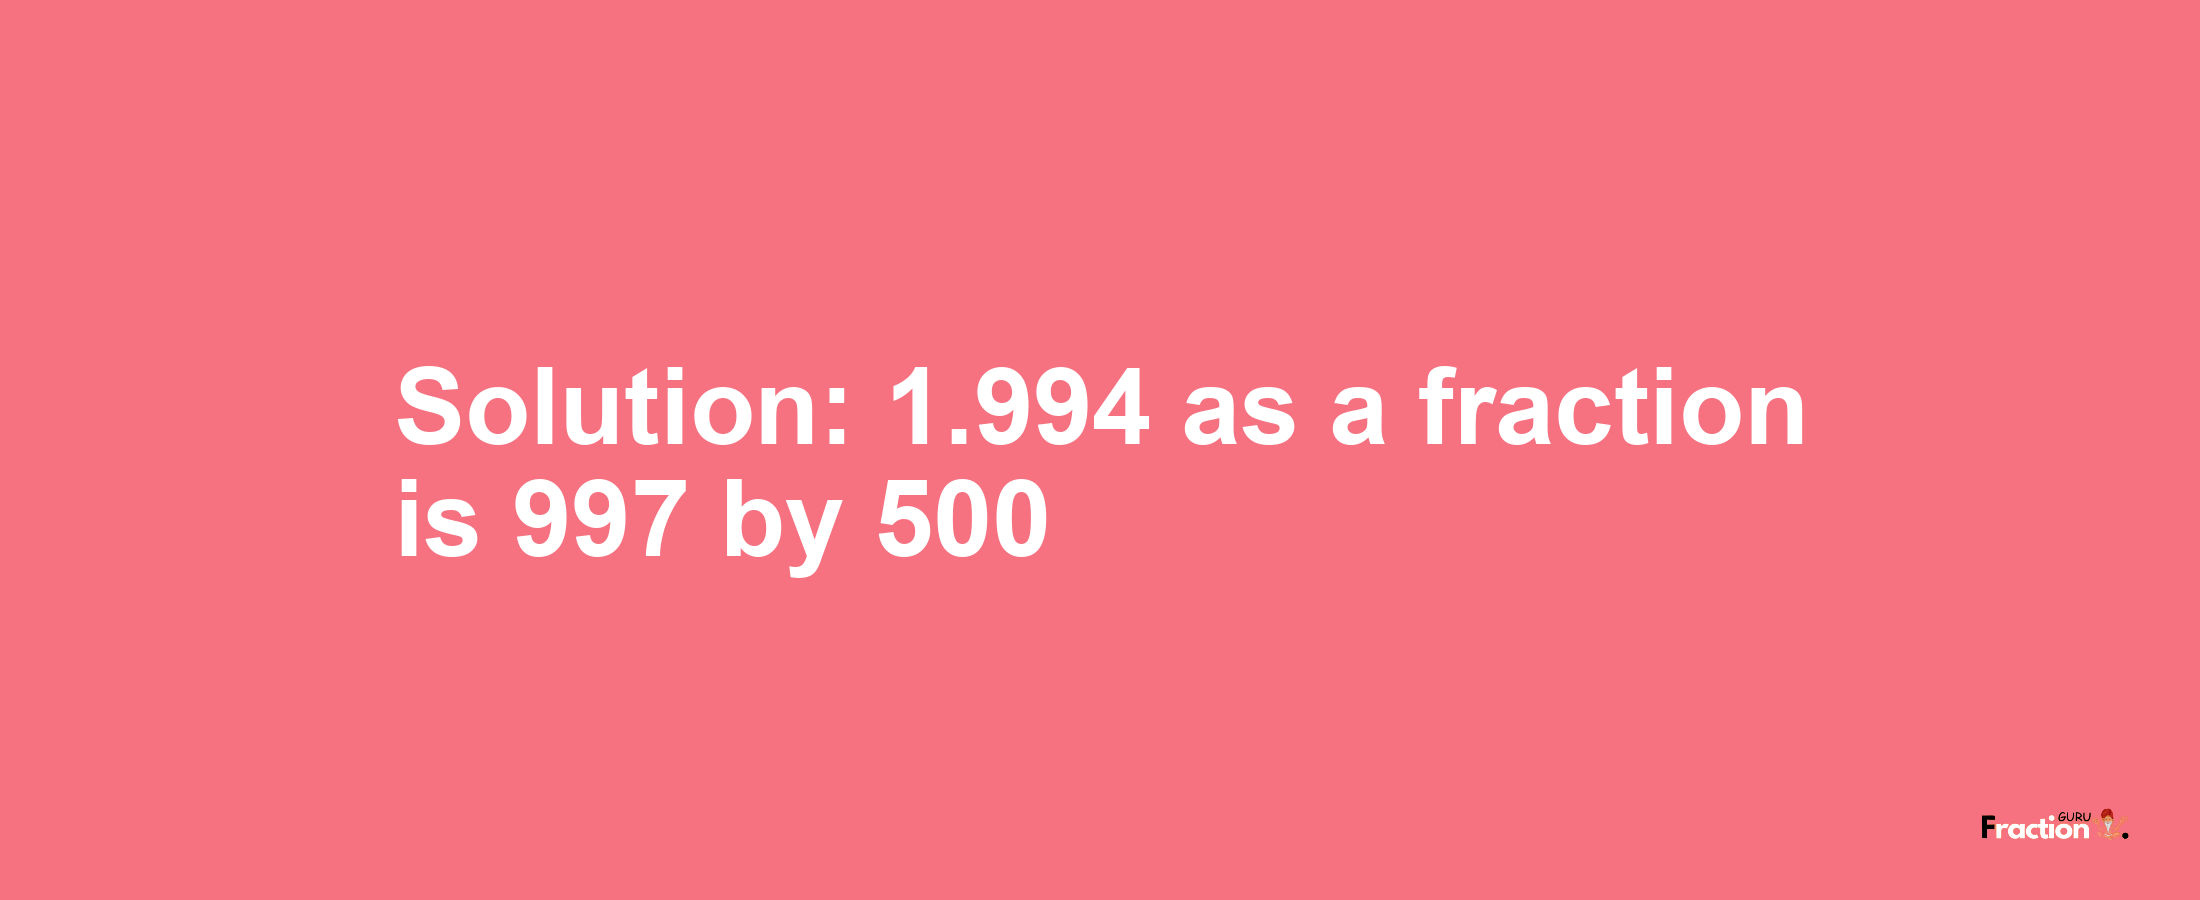 Solution:1.994 as a fraction is 997/500